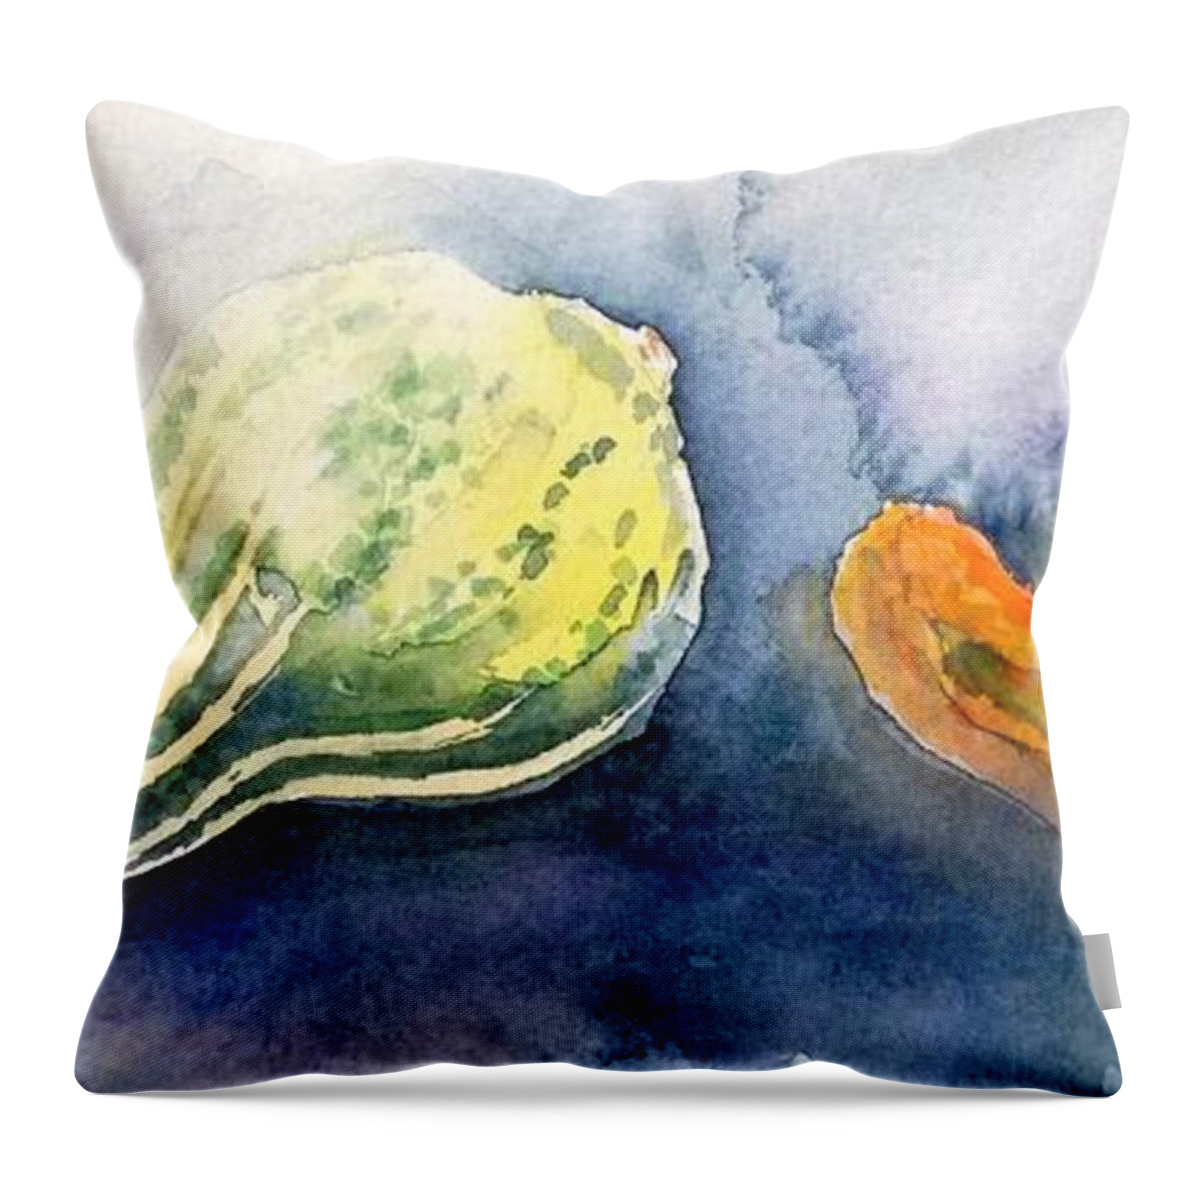 Still Life Throw Pillow featuring the painting Froggy and Gourds by Yoshiko Mishina